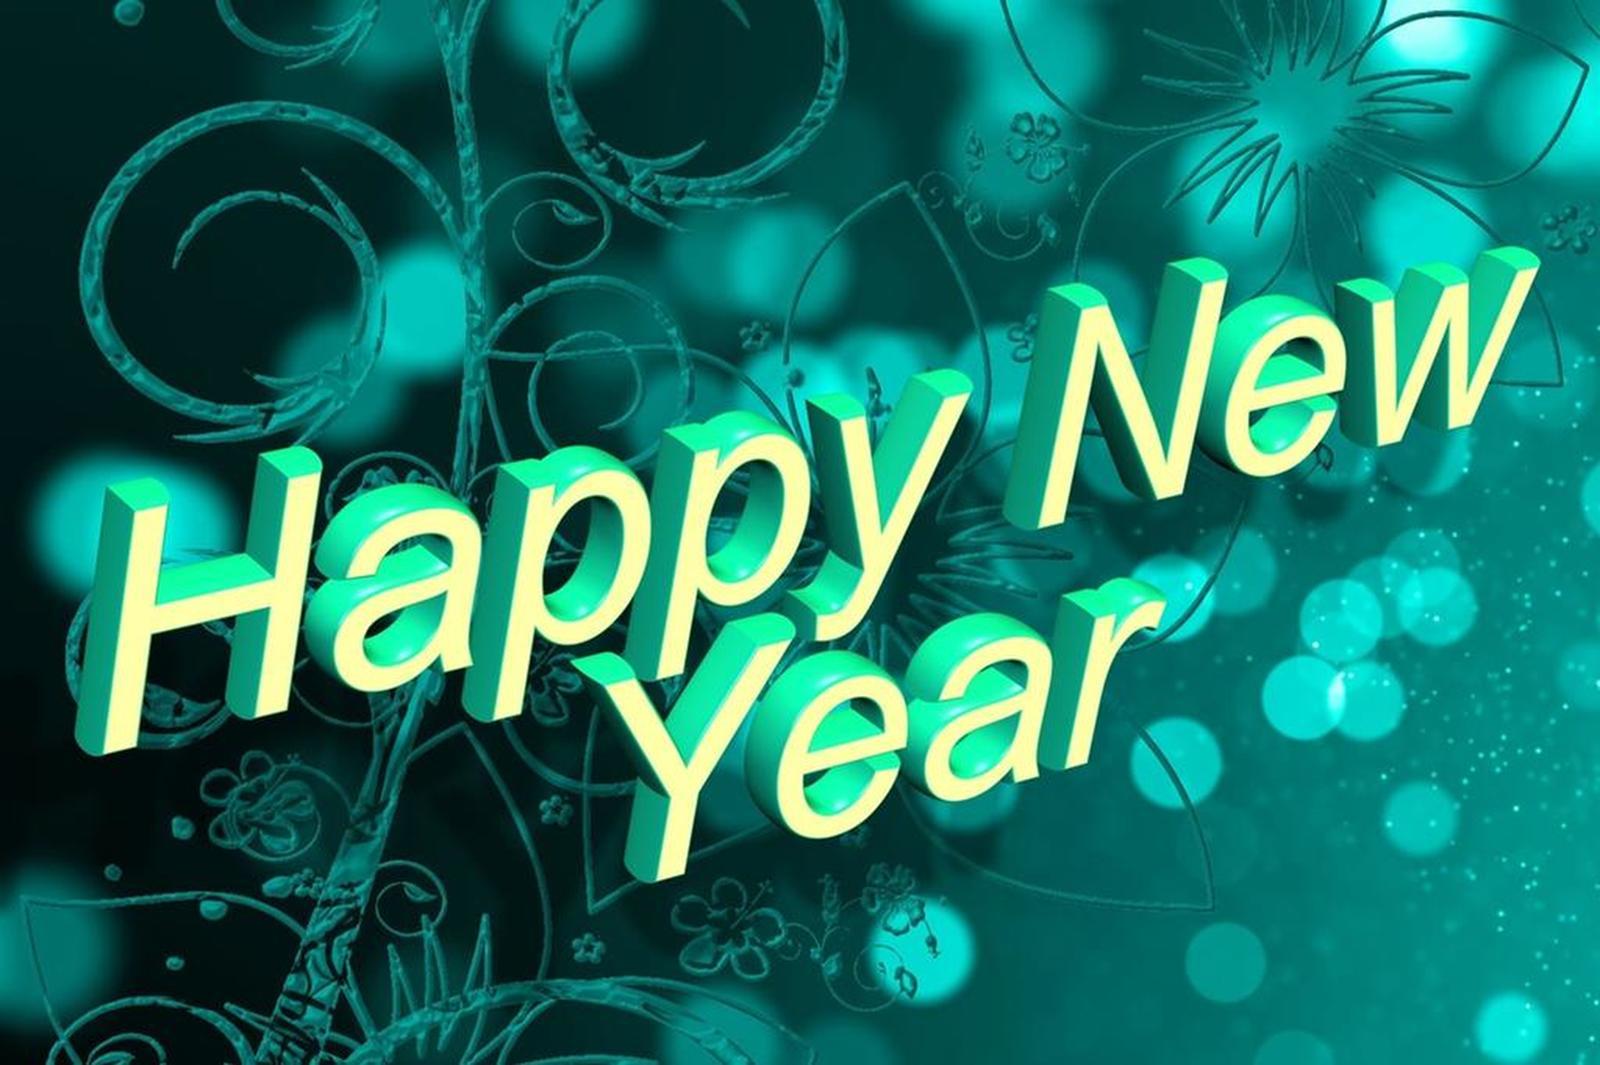 Happy New Year 2019 Image Wishes Quotes Wallpaper Mazaday